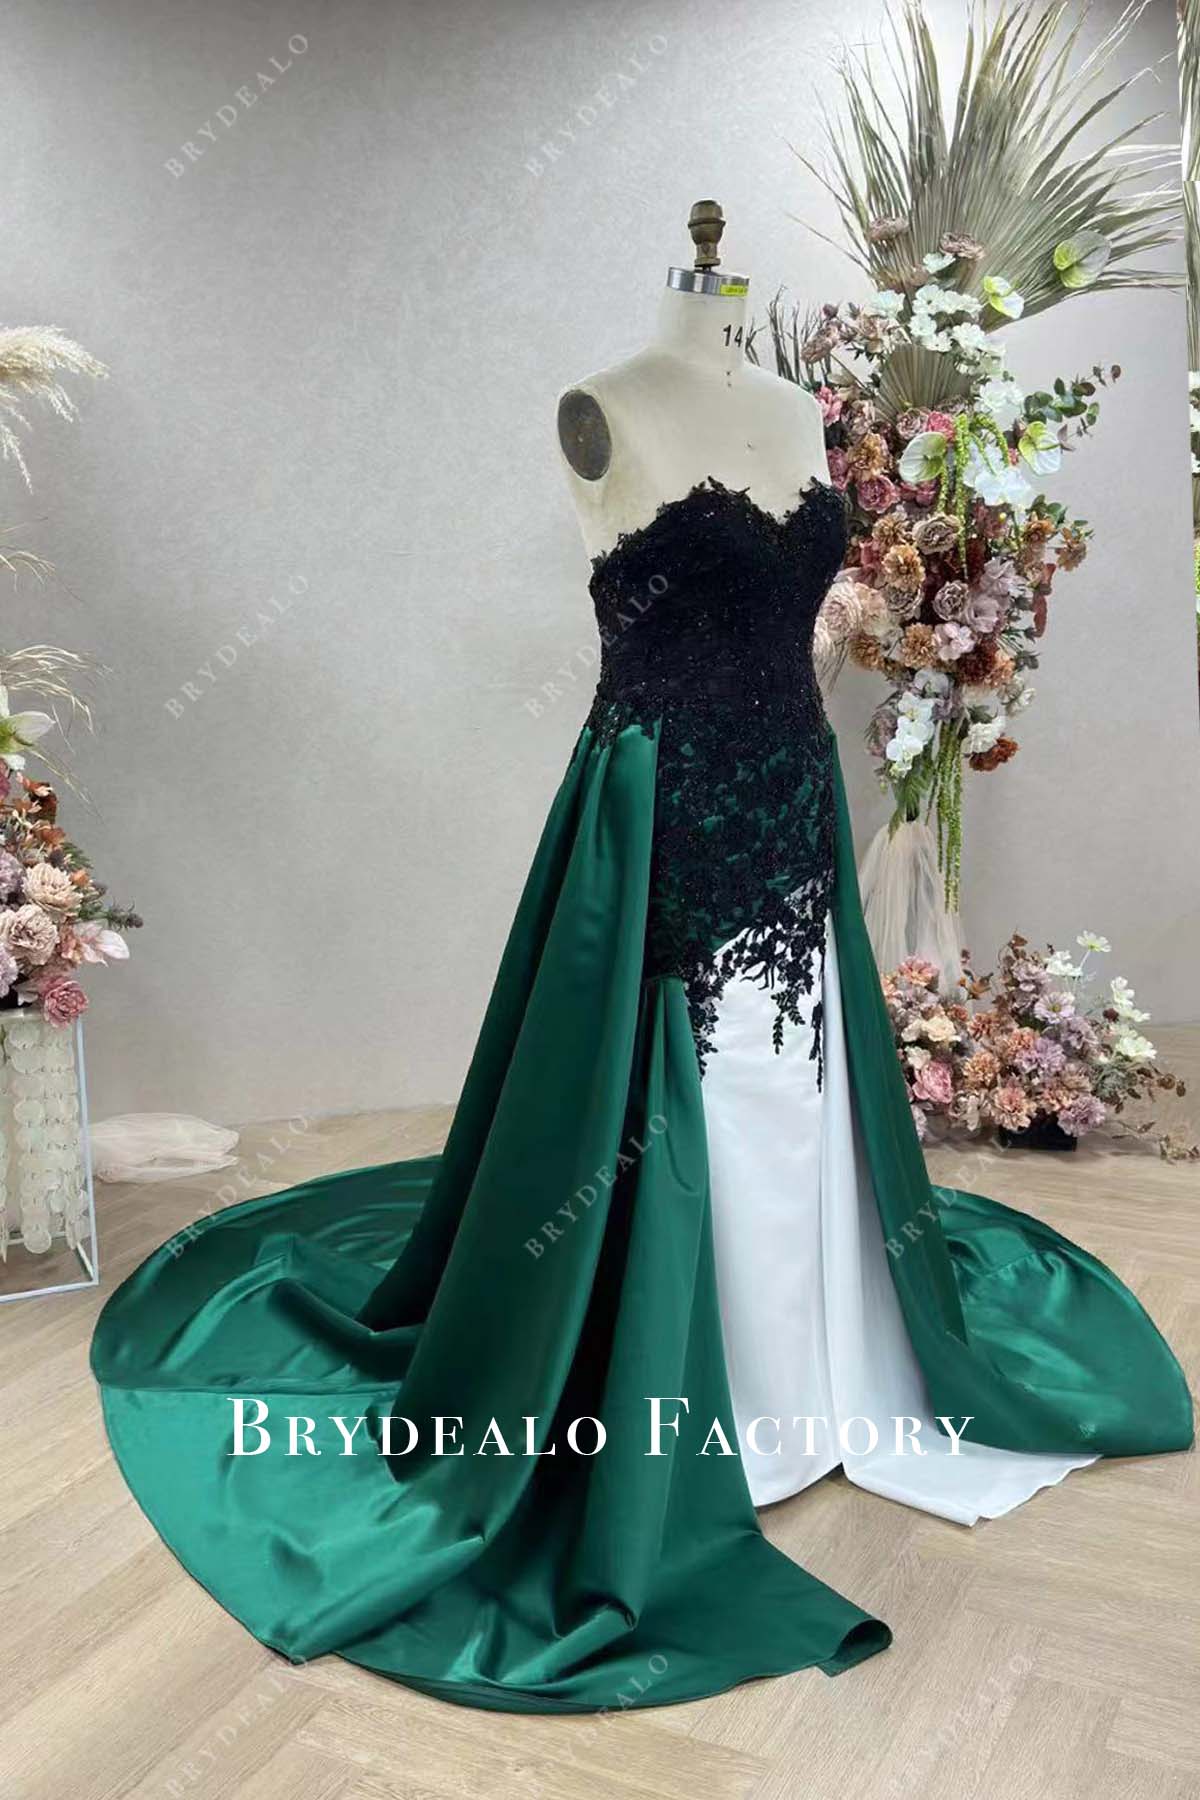 green overskirt strapless black lace white satin wedding gown